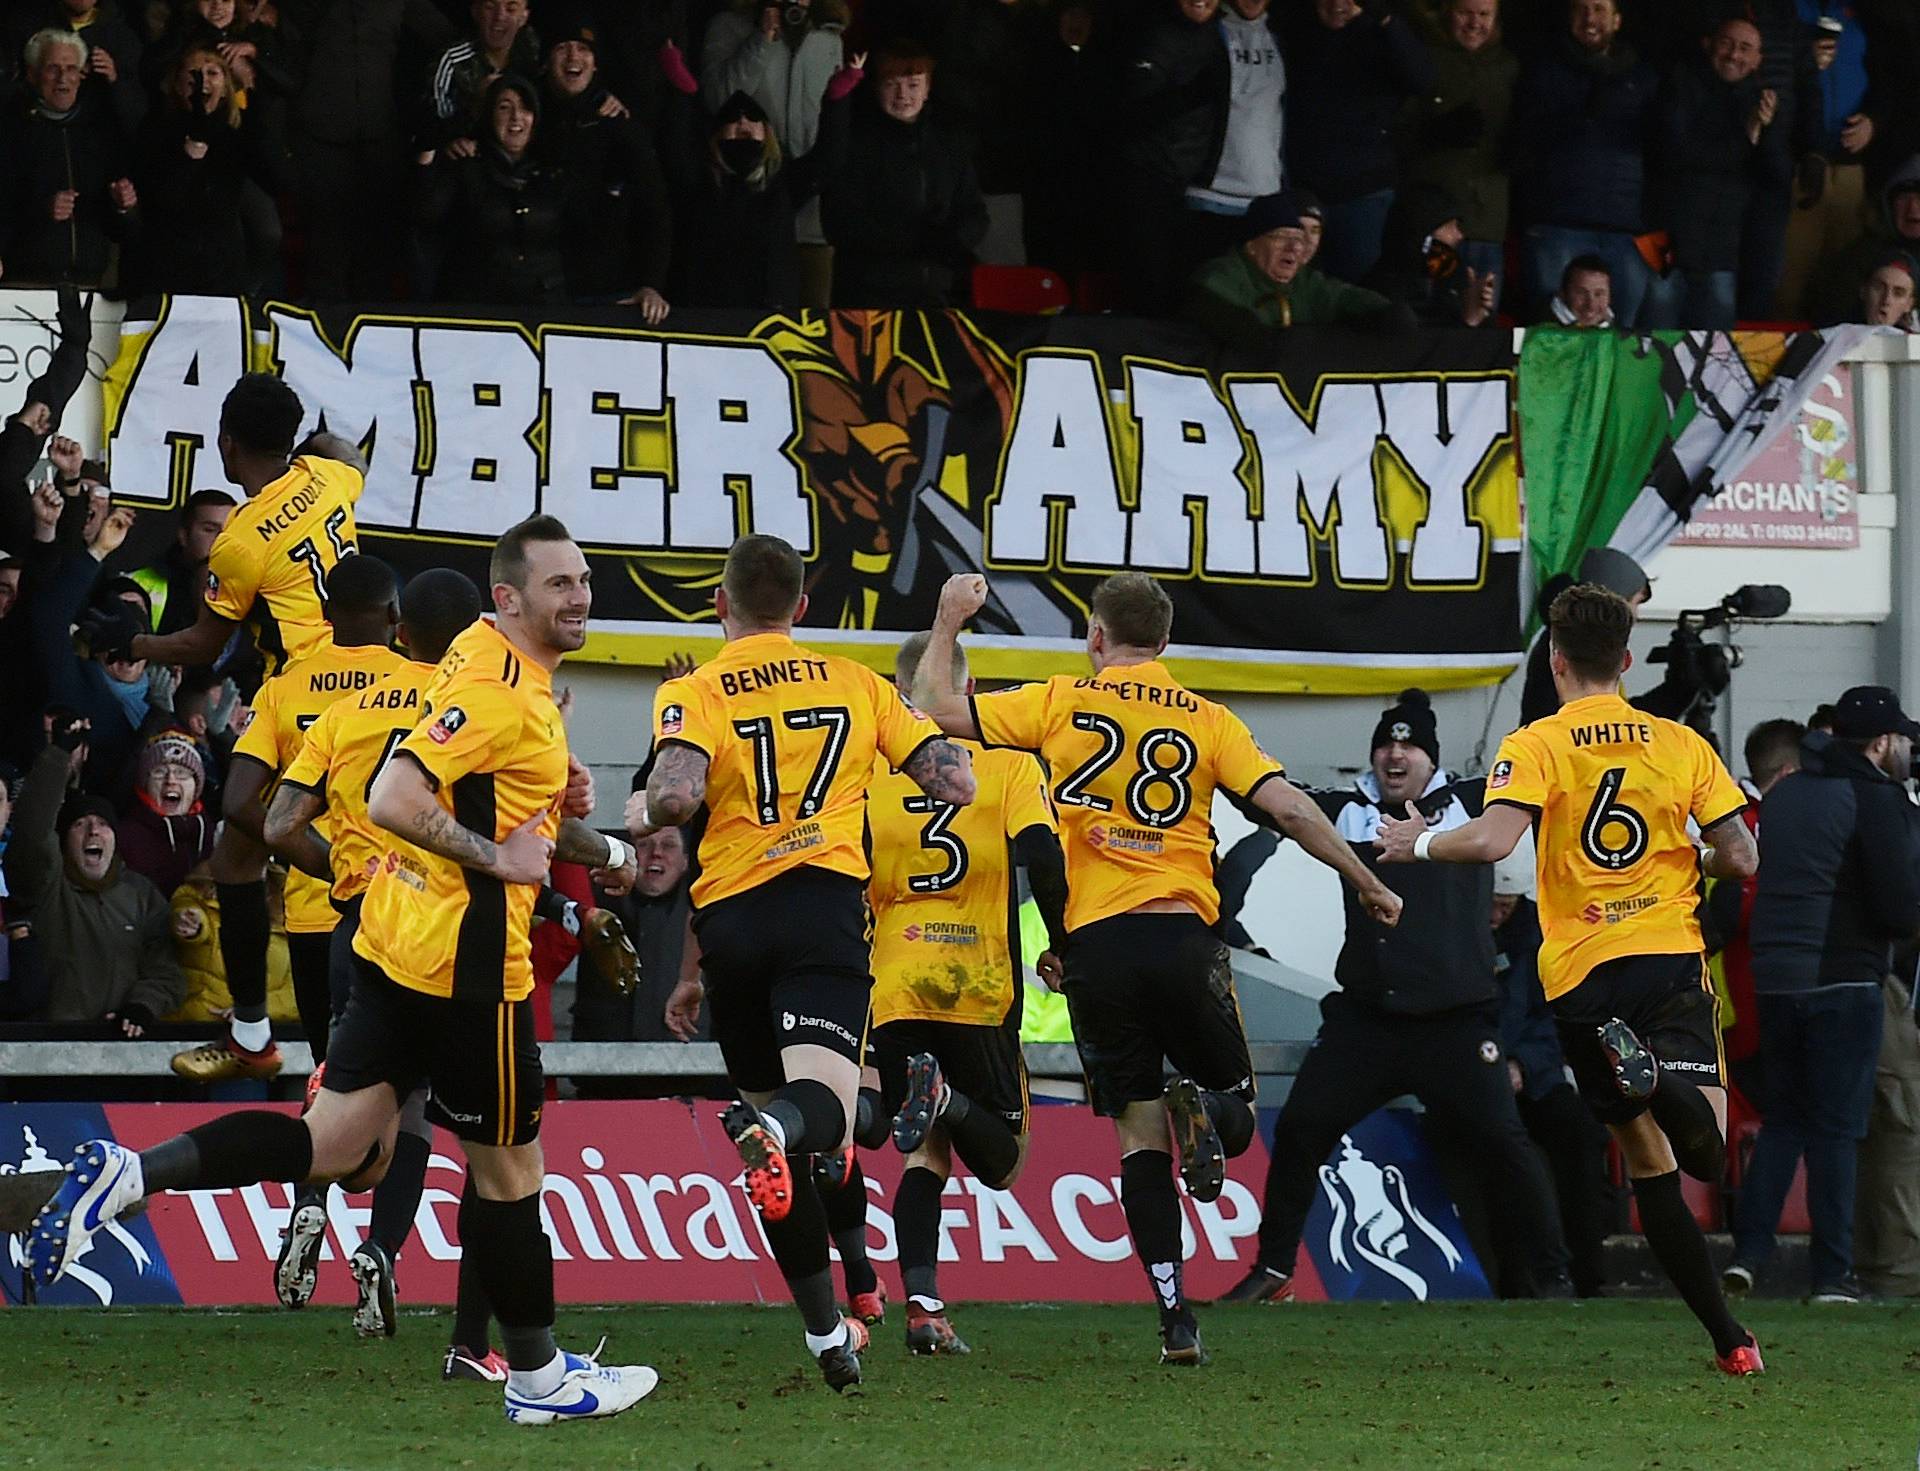 FA Cup Third Round - Newport County AFC vs Leeds United